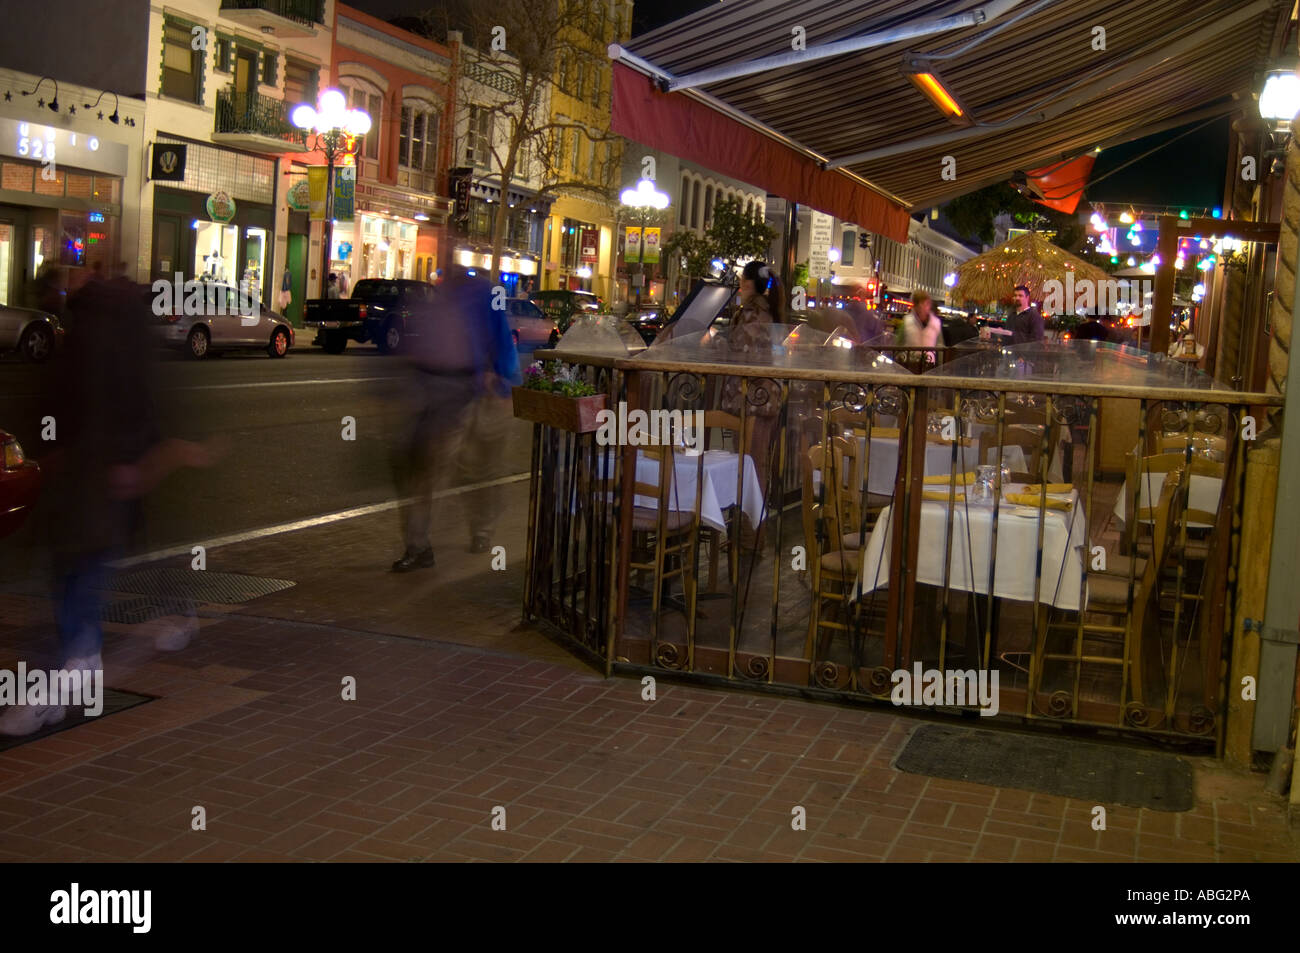 Sidewalk cafe in the Gaslamp restaurant area of downtown San Diego. Stock Photo